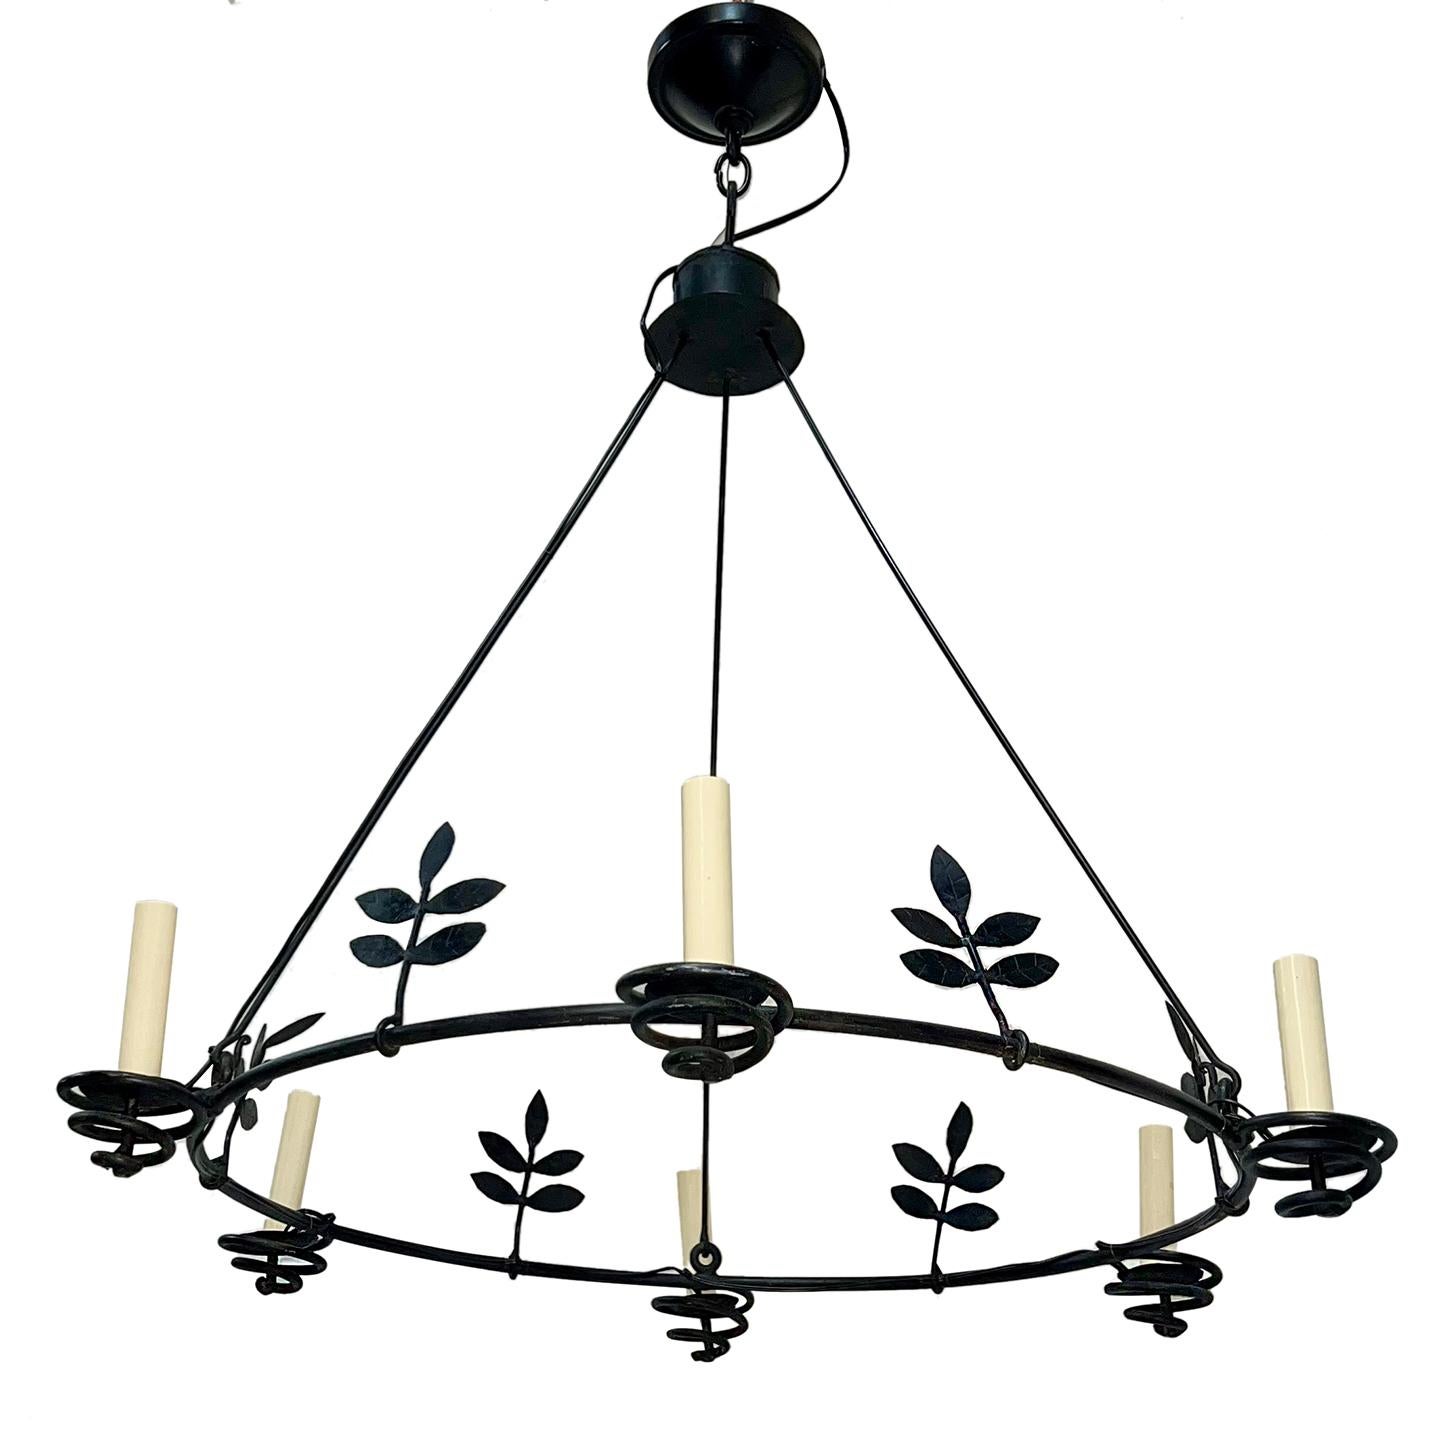 A circa 1960's Swedish chandelier with foliage chandelier and 6 candelabra lights.

Measurements:
Drop: 36